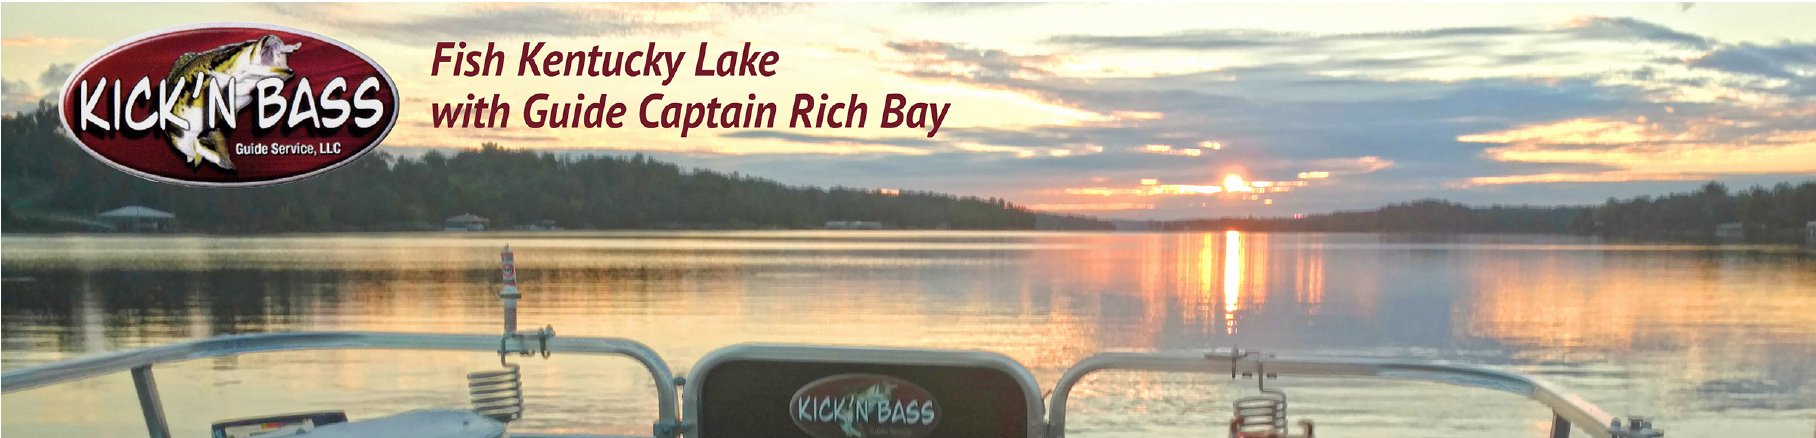 Your Kick'n Bass Fishing Report for June 18, 2018